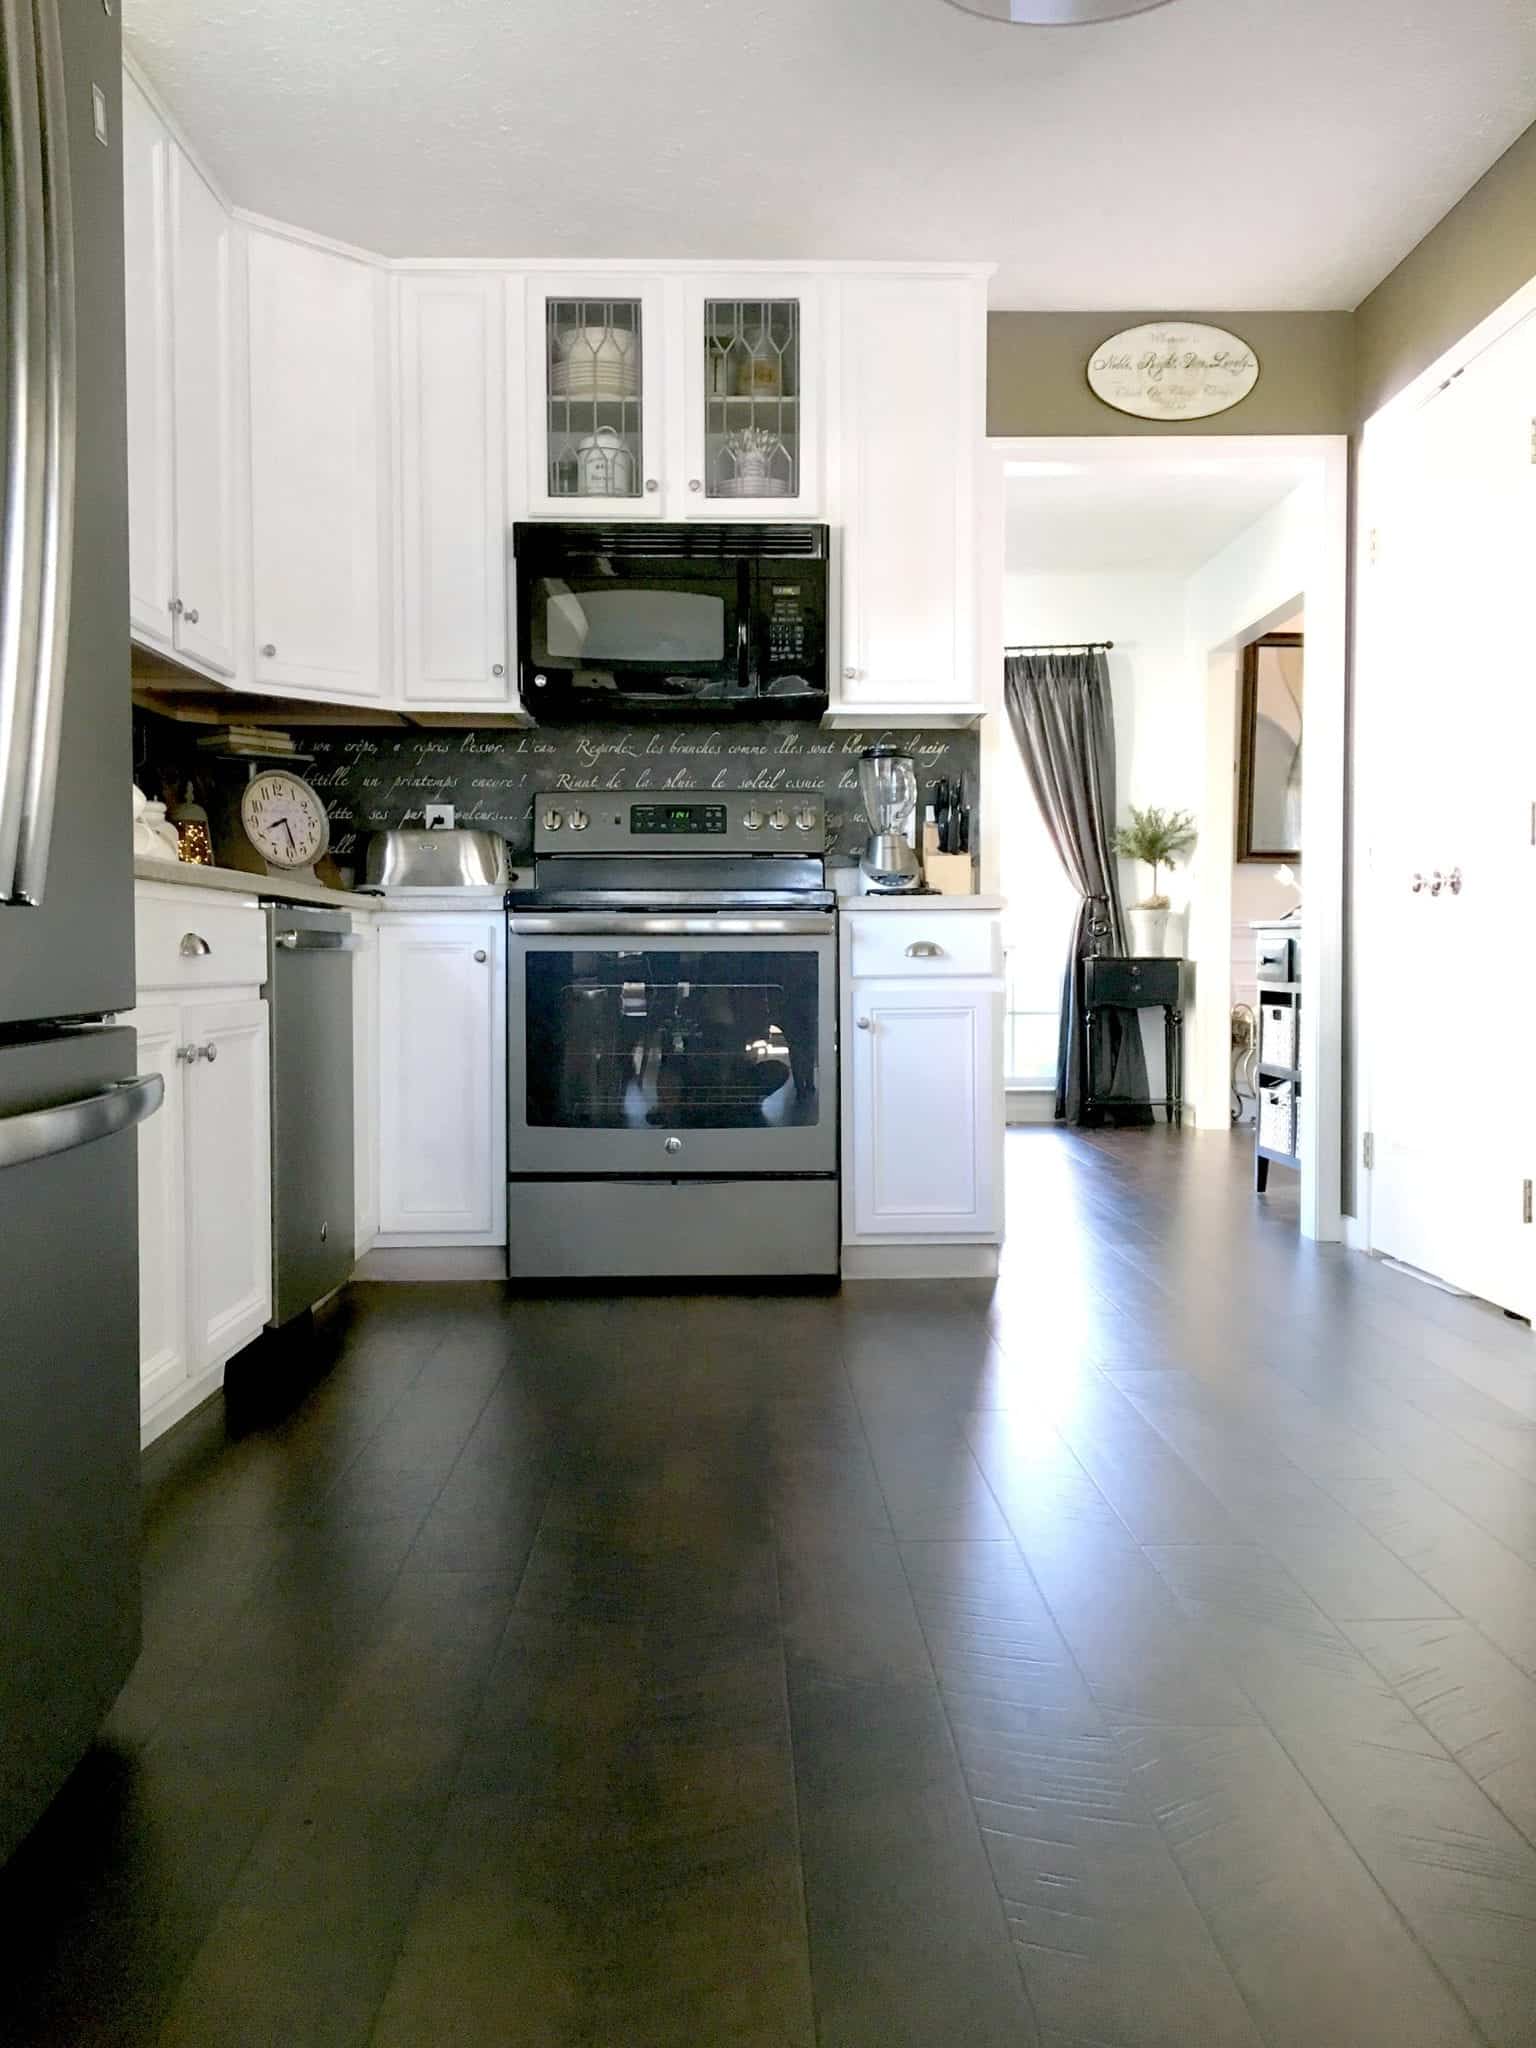 Pergo Flooring: Our Kitchen Reveal! | snazzy little things